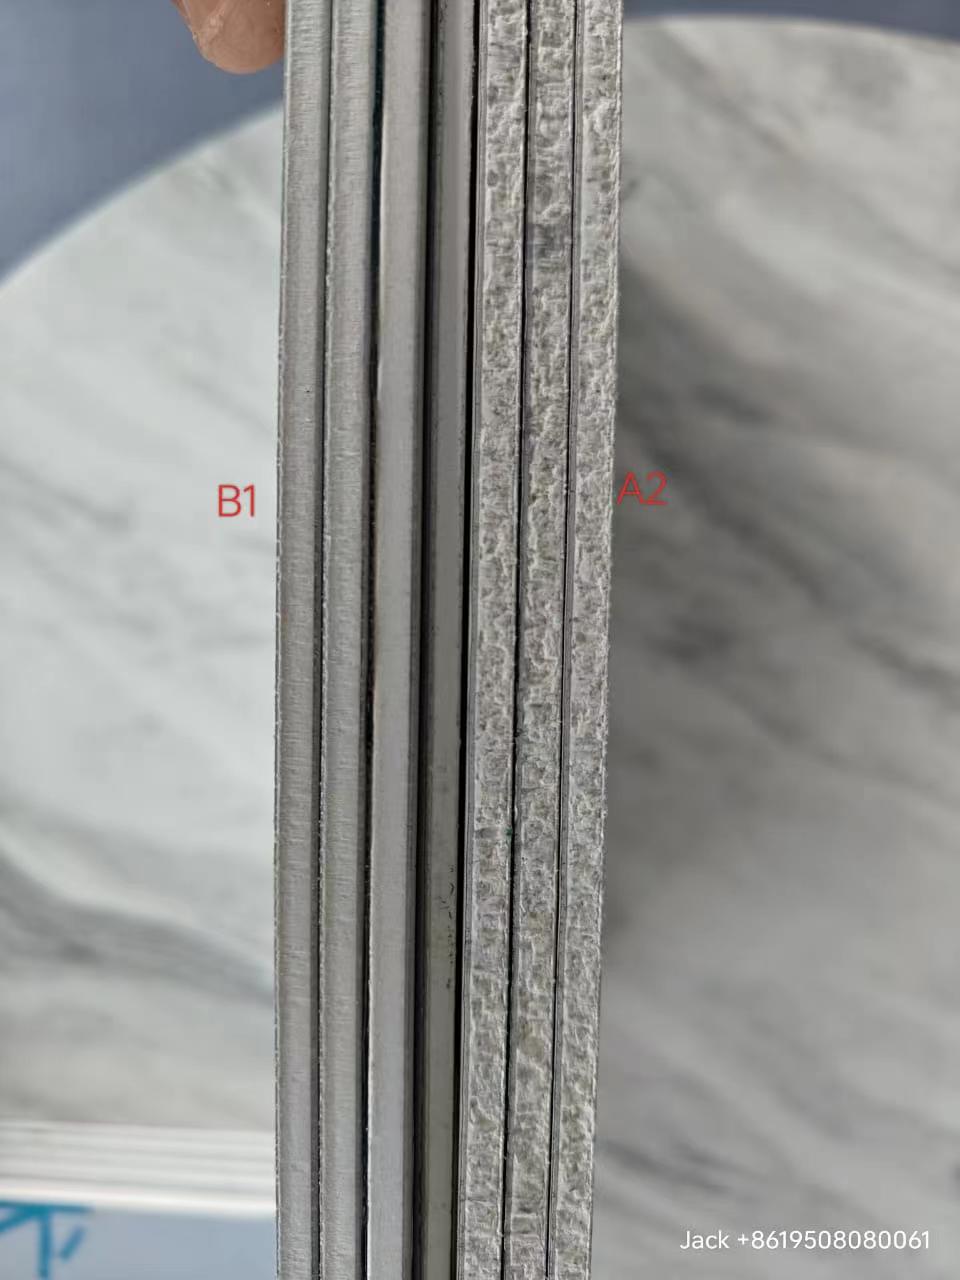 A2 Fireproof Aluminum Composite Panel Wall Panel Cladding